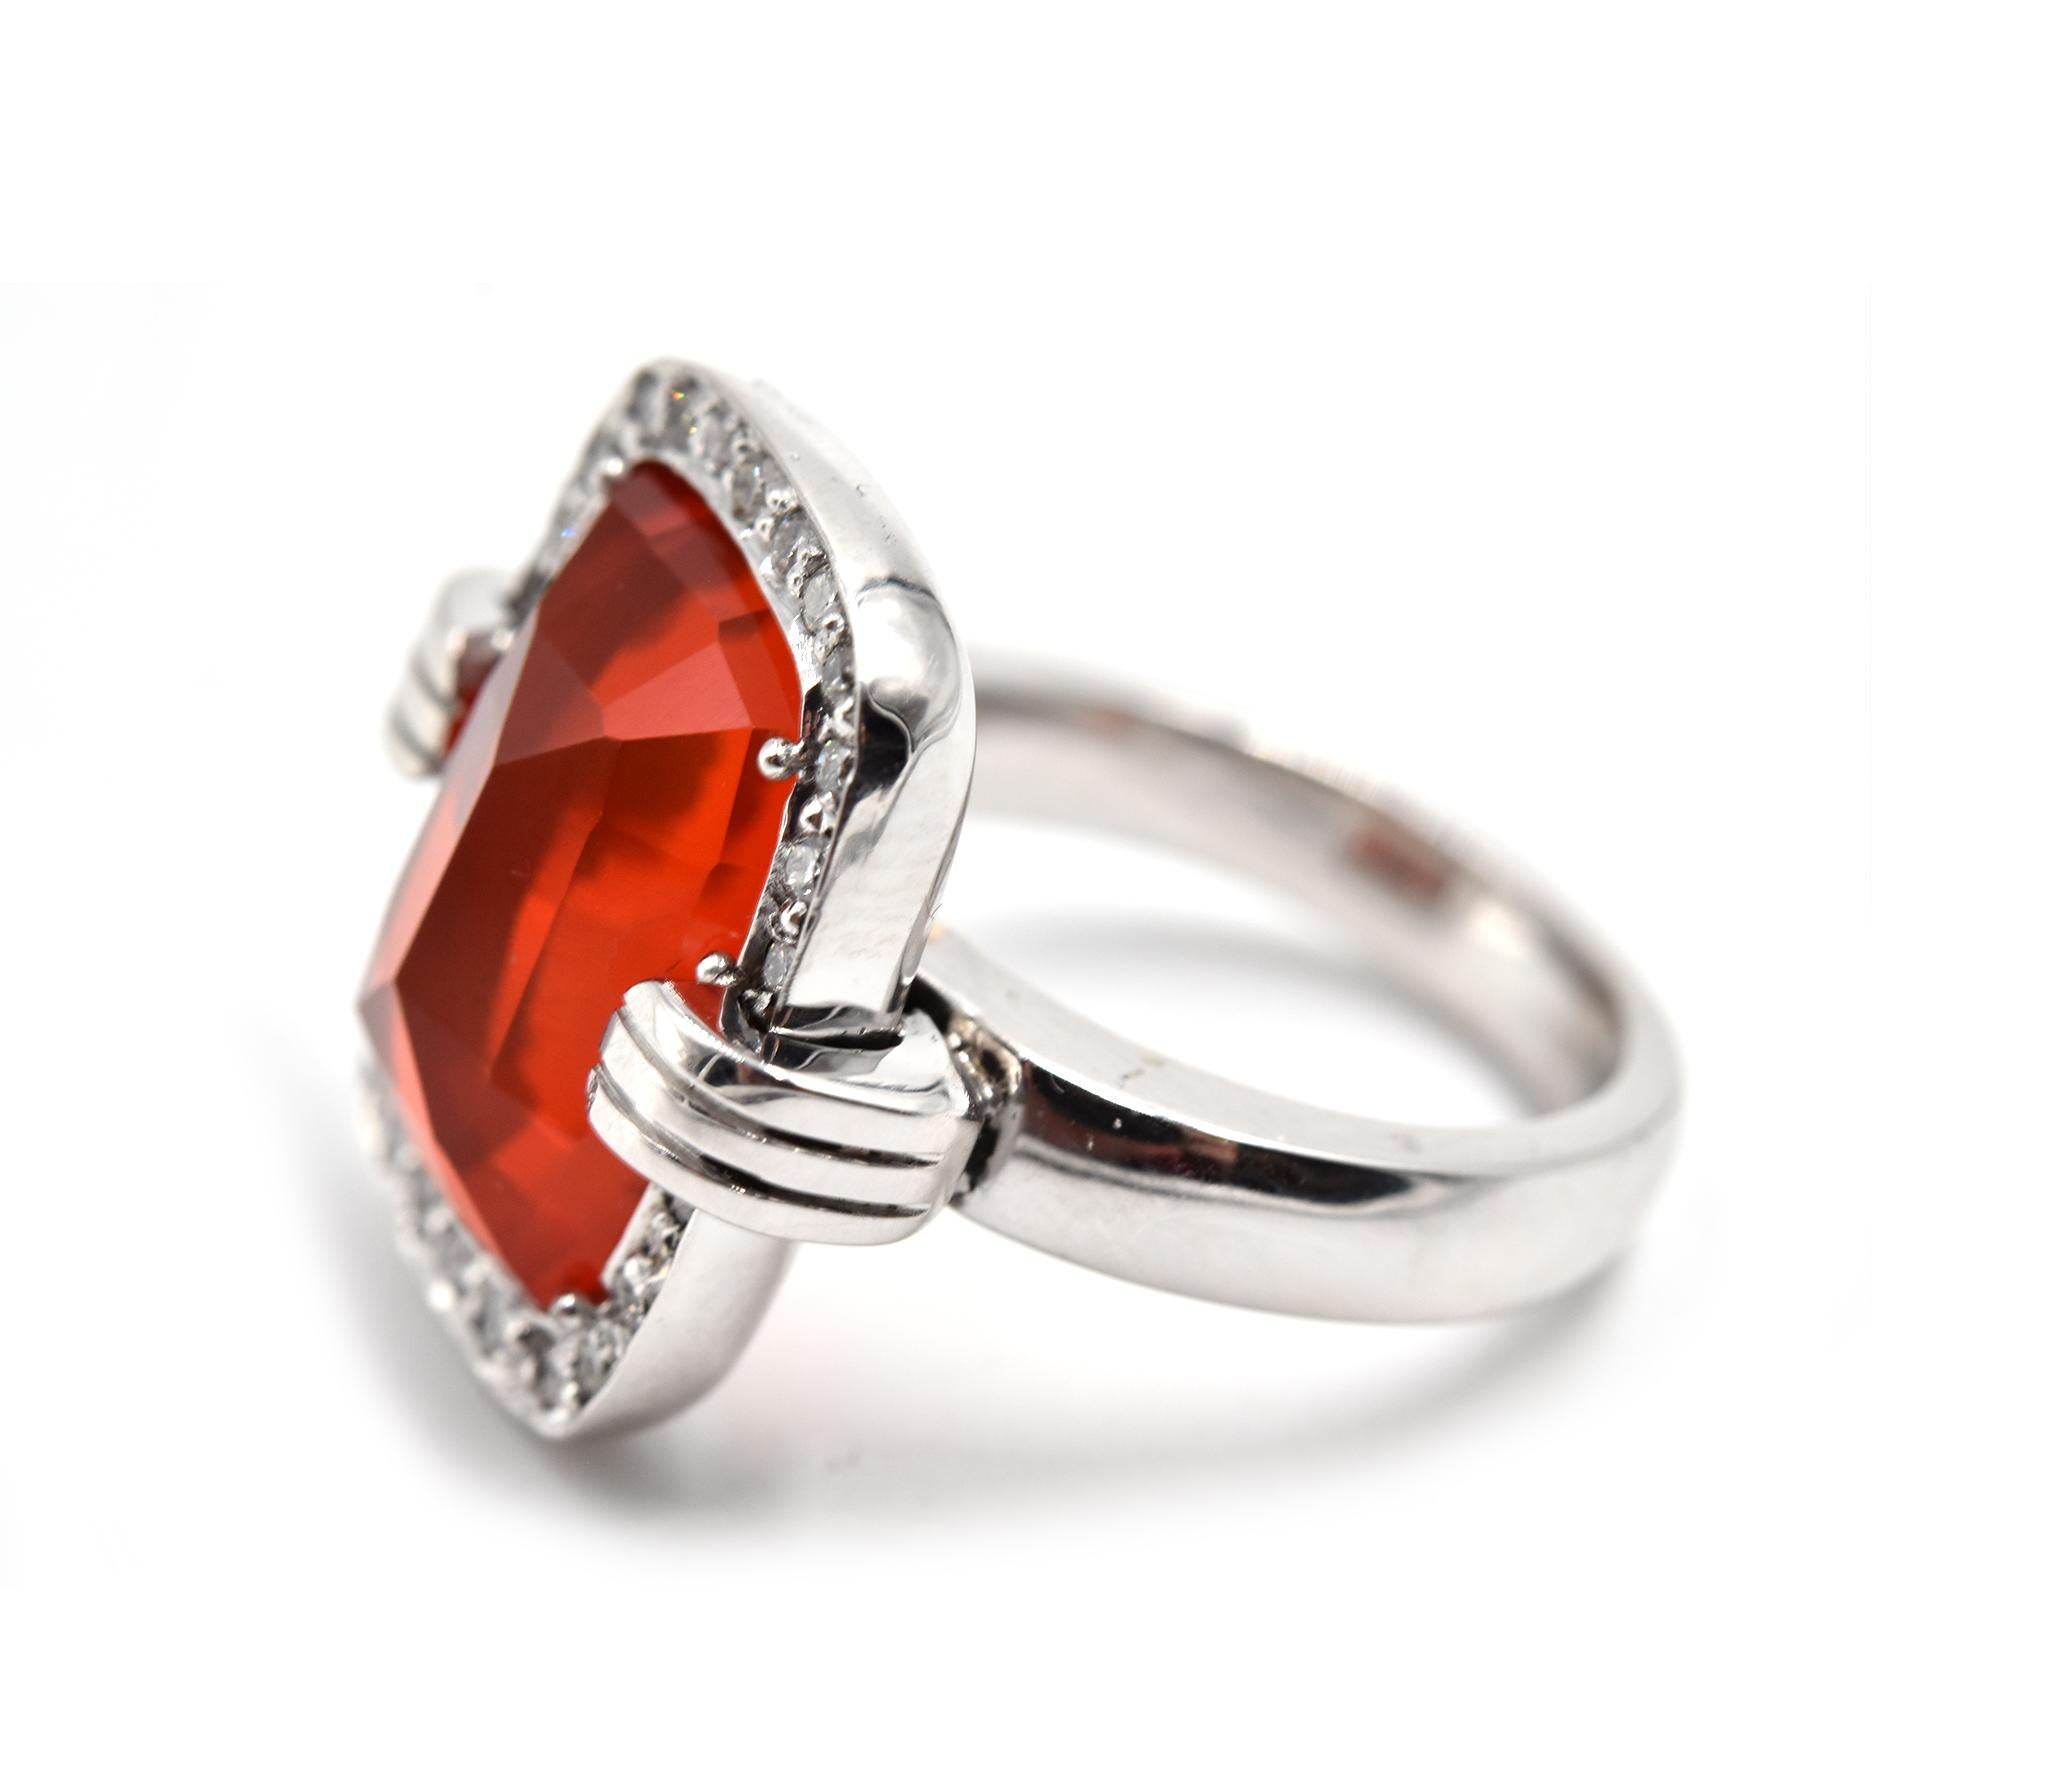 Designer: custom design
Material: 14k white gold
Gemstones: one 6.64 carat cushion cut Mexican fire opal and diamonds
Diamonds: 25 round brilliant cut diamonds = 1.00 carat total weight
Color: G
Clarity: SI1
Dimensions: ring top is 3/4-inch long and